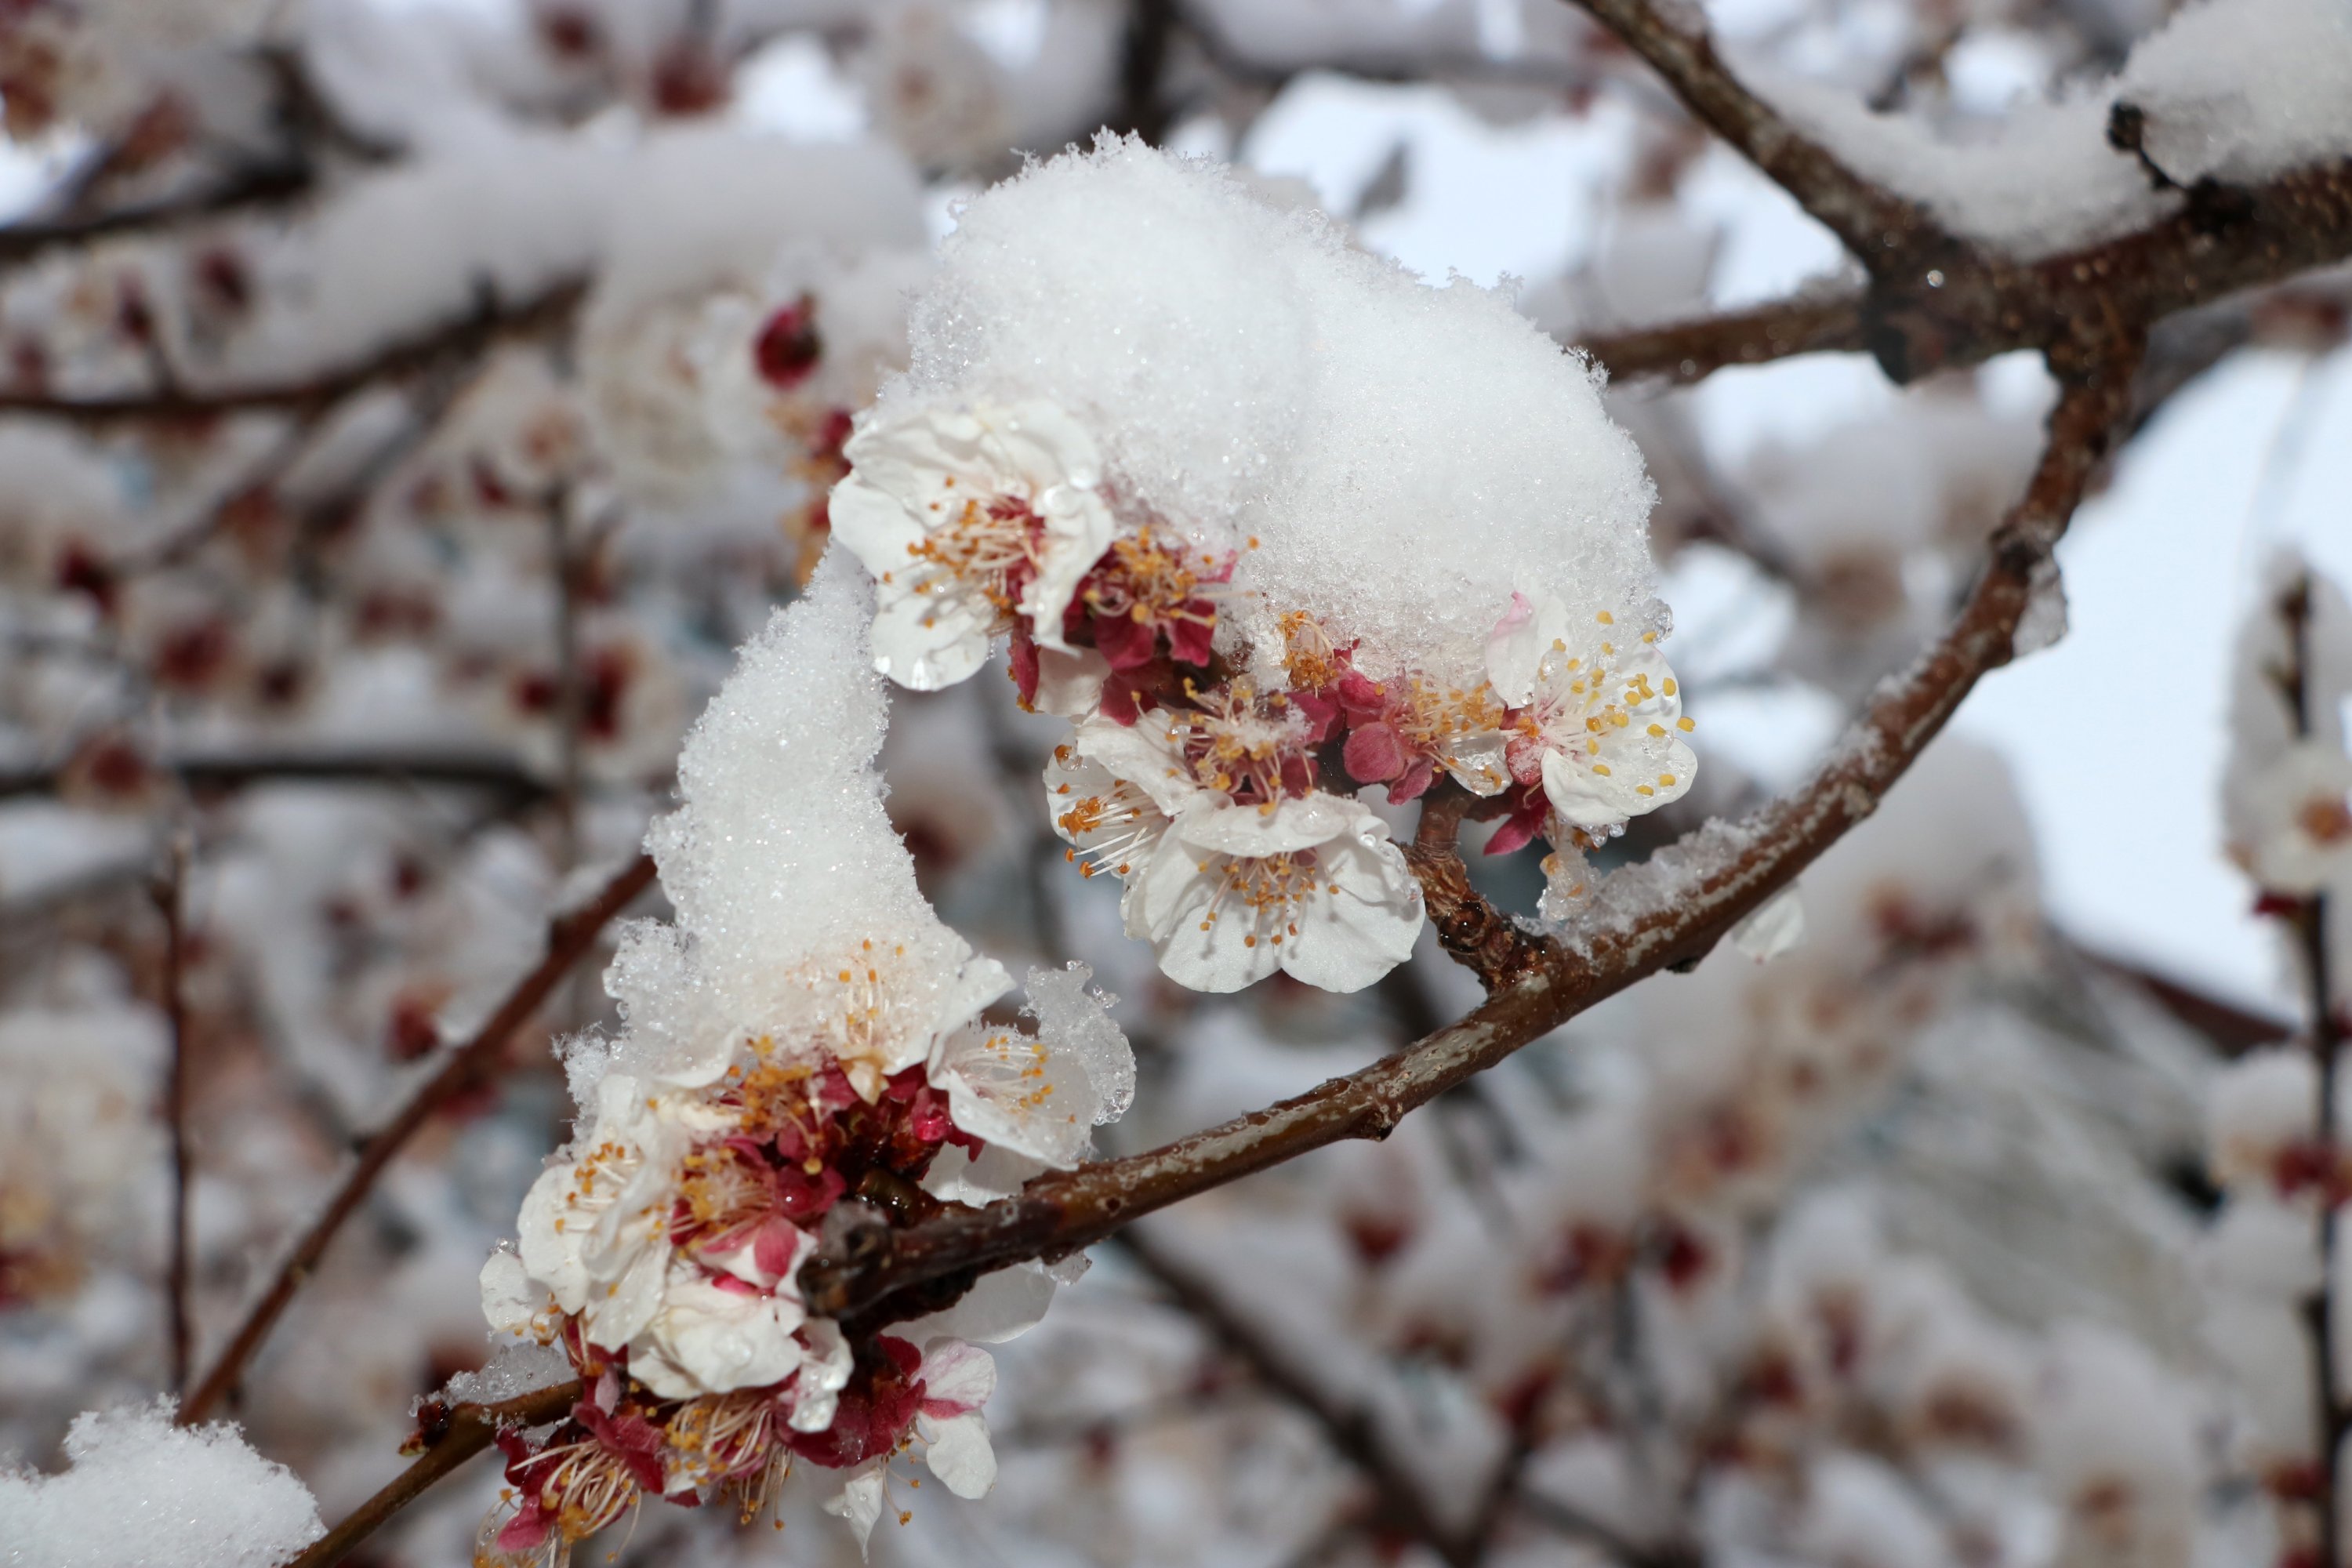 Cherry, plum and almond trees were covered with snow in Afyonkarahisar, Türkiye, March 29, 2023. (DHA Photo)